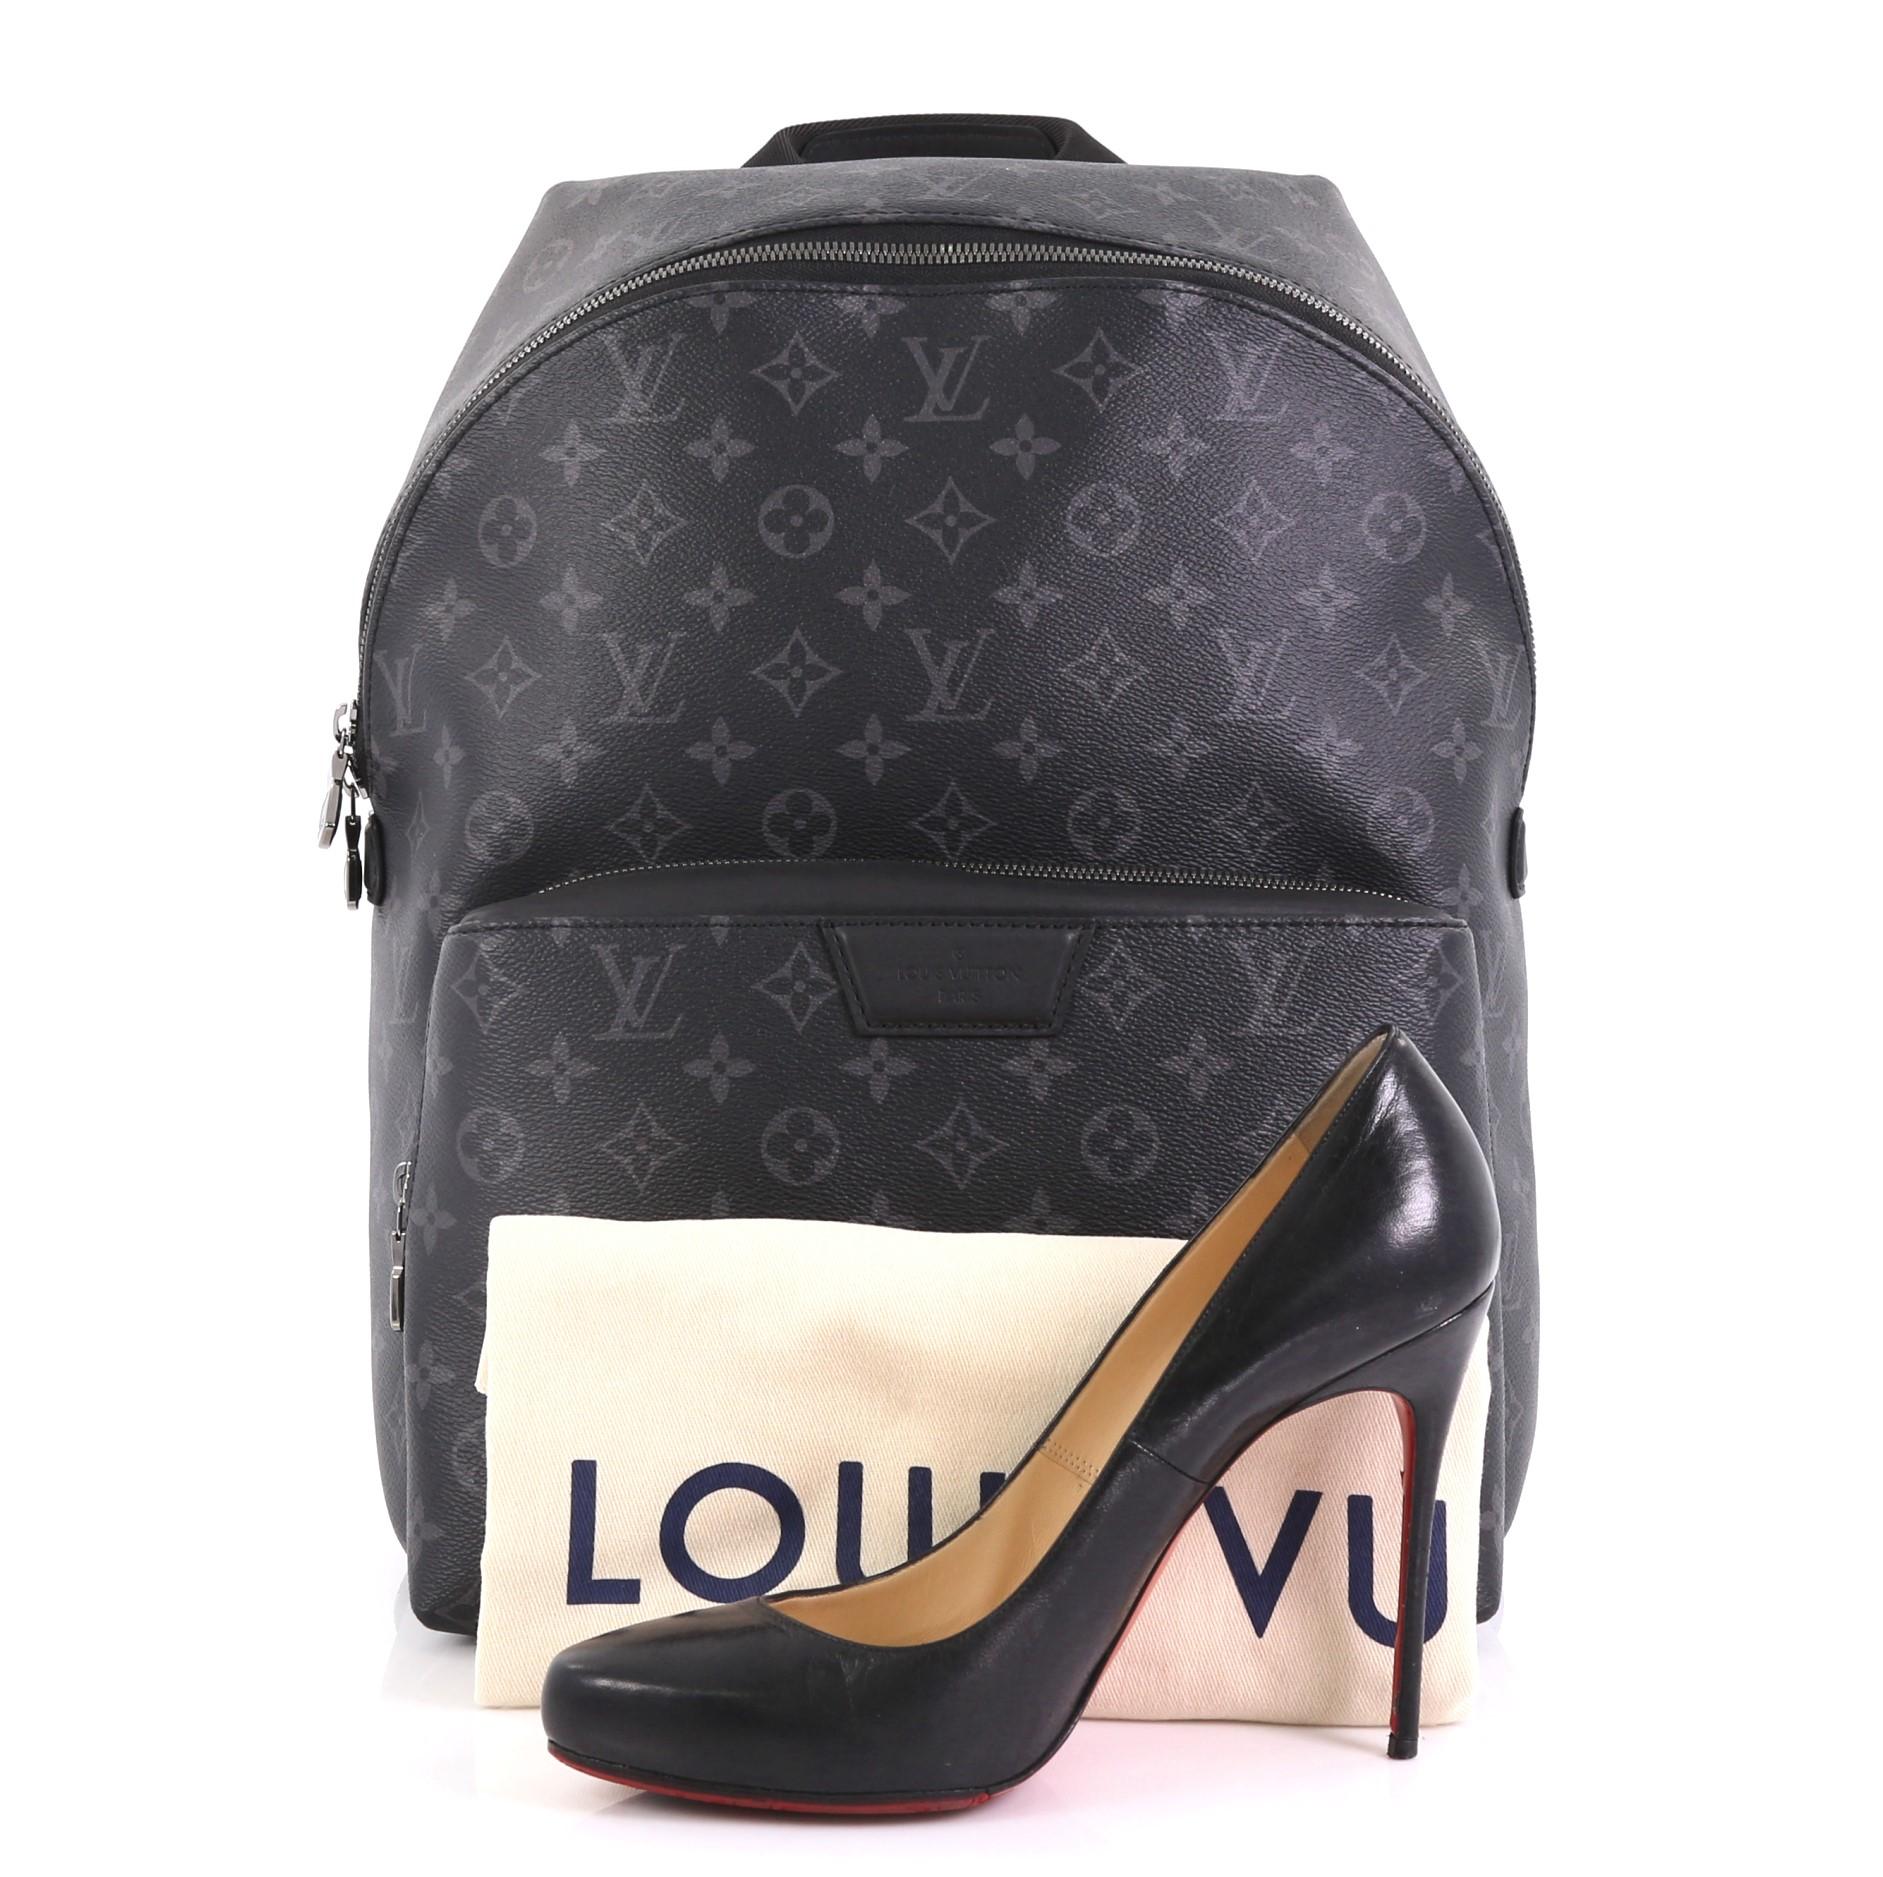 This Louis Vuitton Apollo Backpack Monogram Eclipse Canvas, crafted from black monogram eclipse coated canvas, features a top handle, adjustable back straps, exterior front zip compartment, and gunmetal-tone hardware. Its two-way zip closure opens